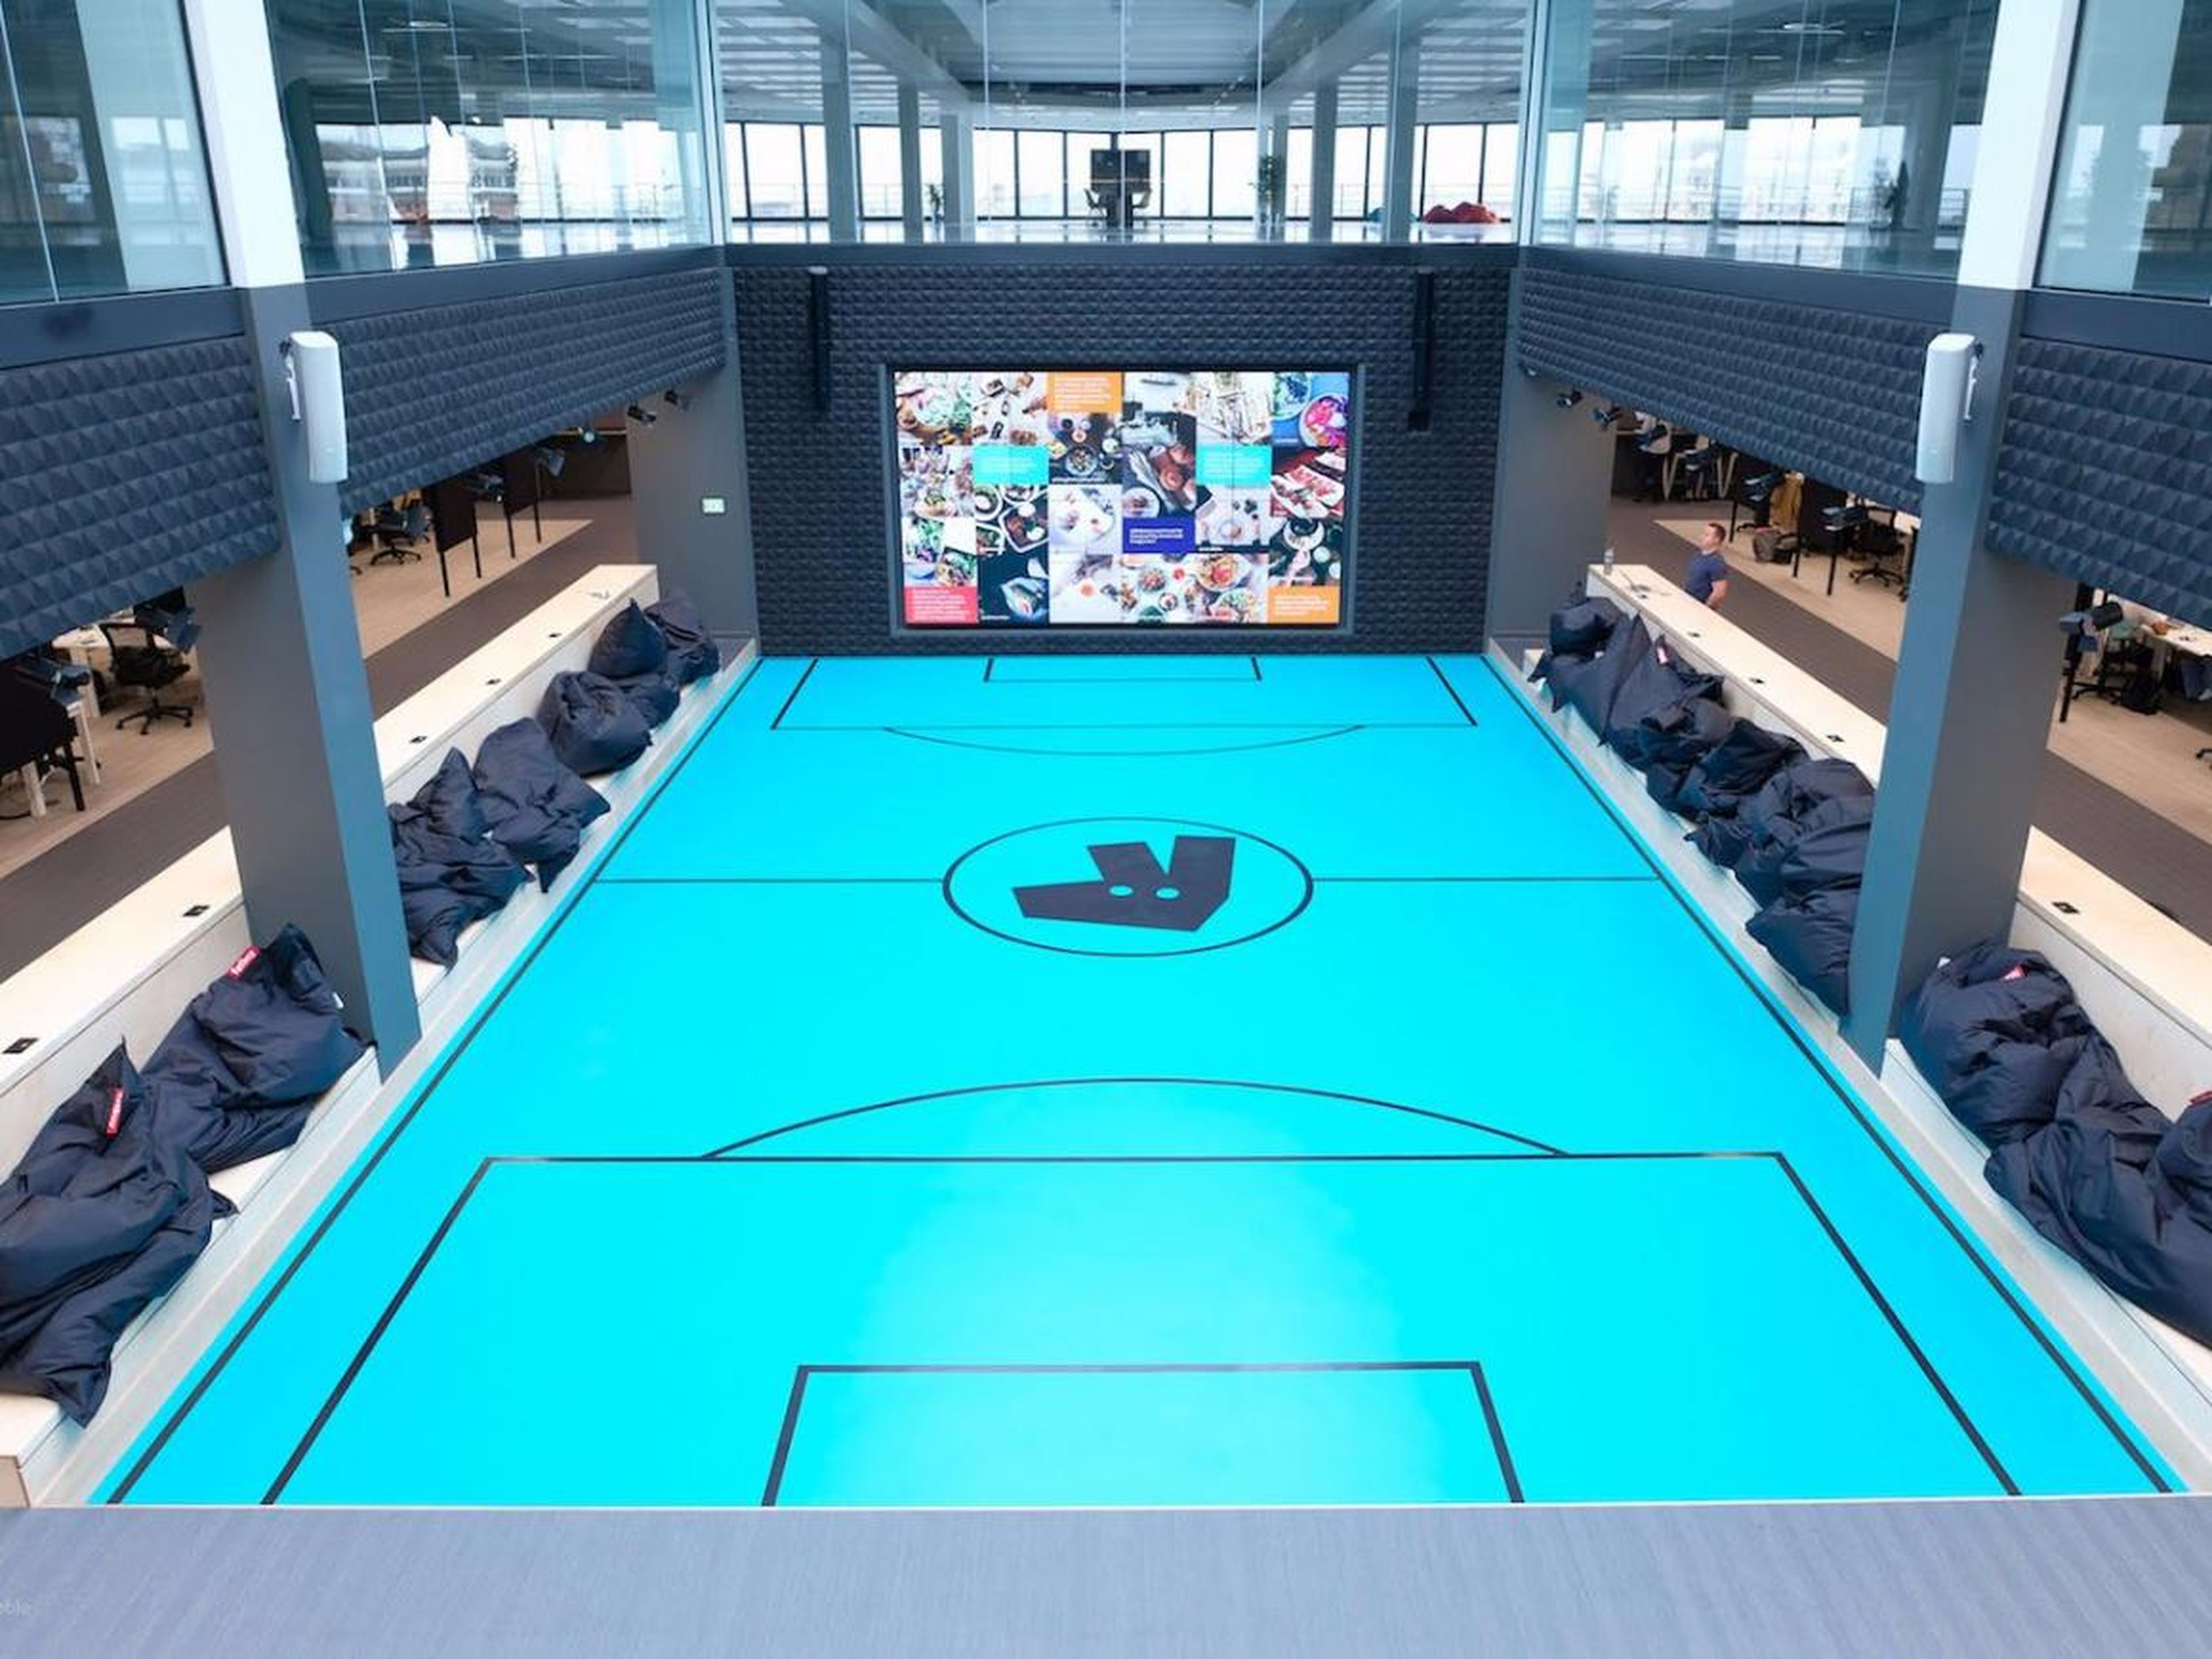 A centre court meeting space that used for large team meetings — but not for sports.